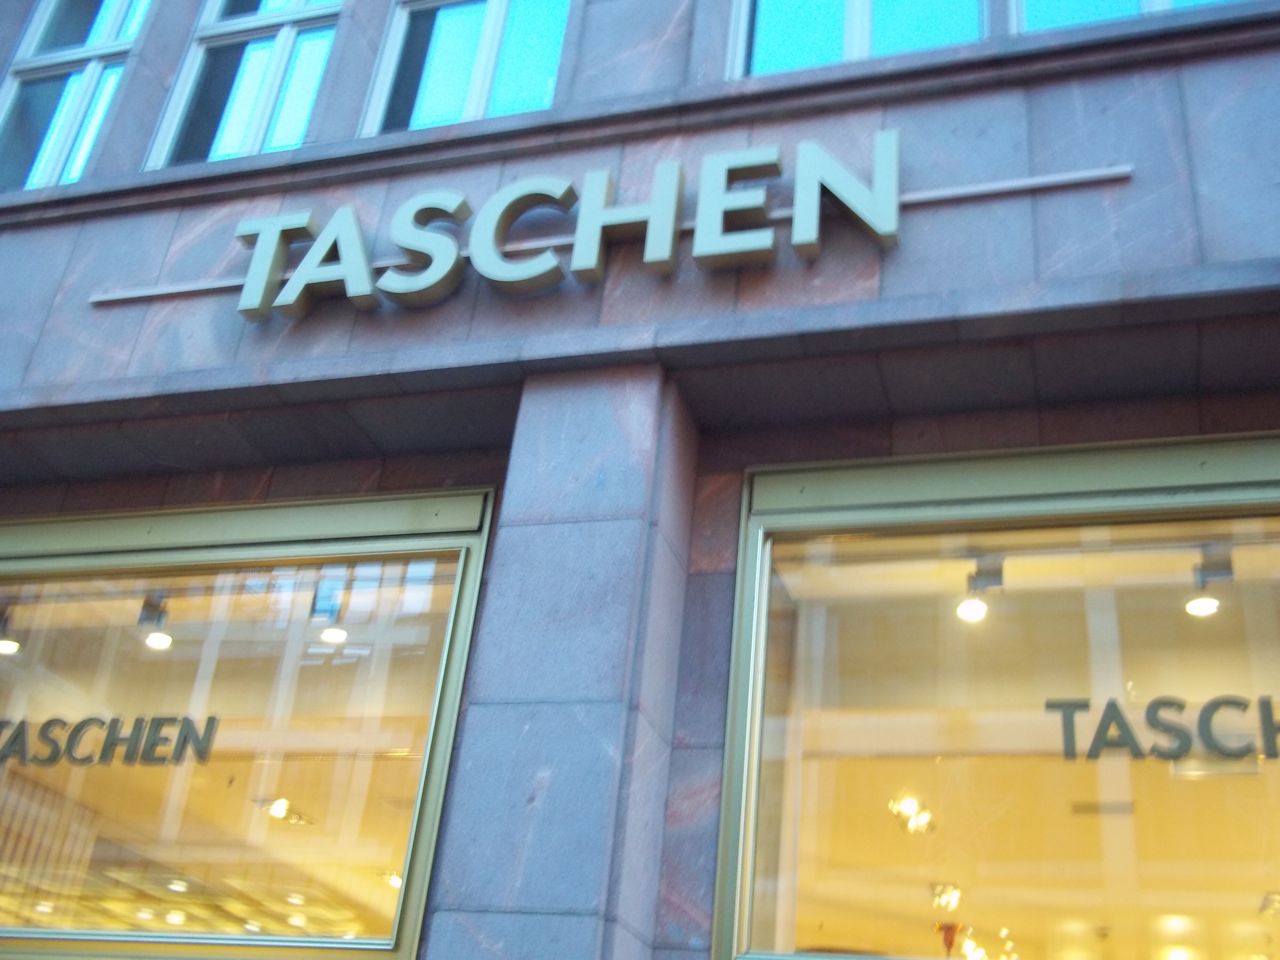 You are currently viewing <!--:en-->Fabulous Iconic Films at Taschen in Berlin ” Taxi Driver” The Iconic Film!!!<!--:-->